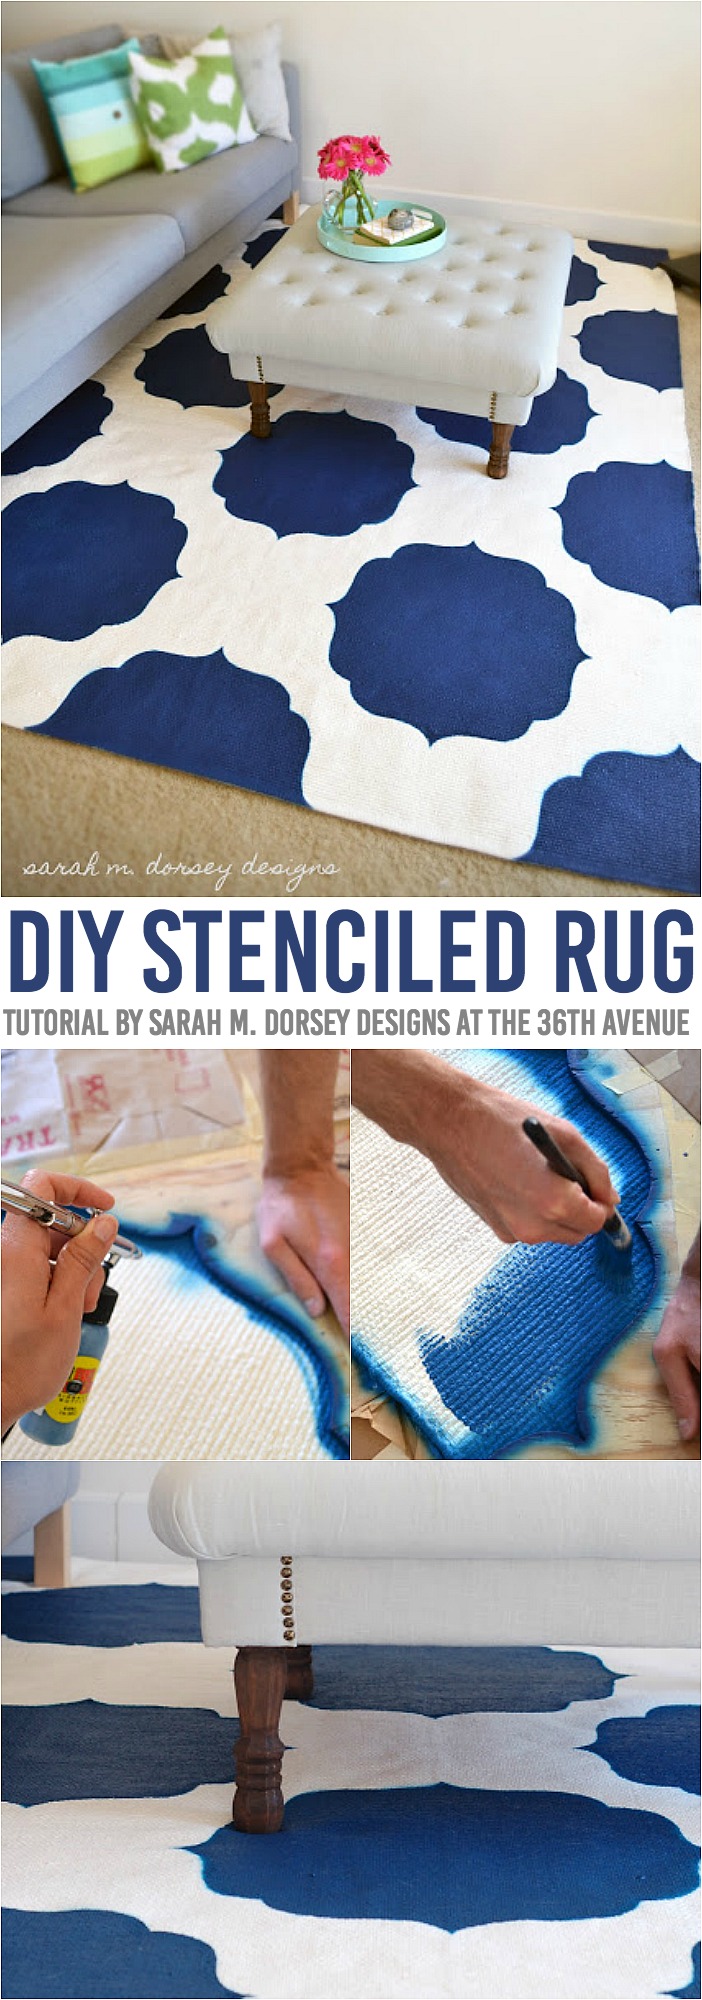 This DIY Stenciled Rug Tutorial is awesome and easy to follow! Can you believe this rug was hand painted? The possibilities are simply endless! Home decor just got better!